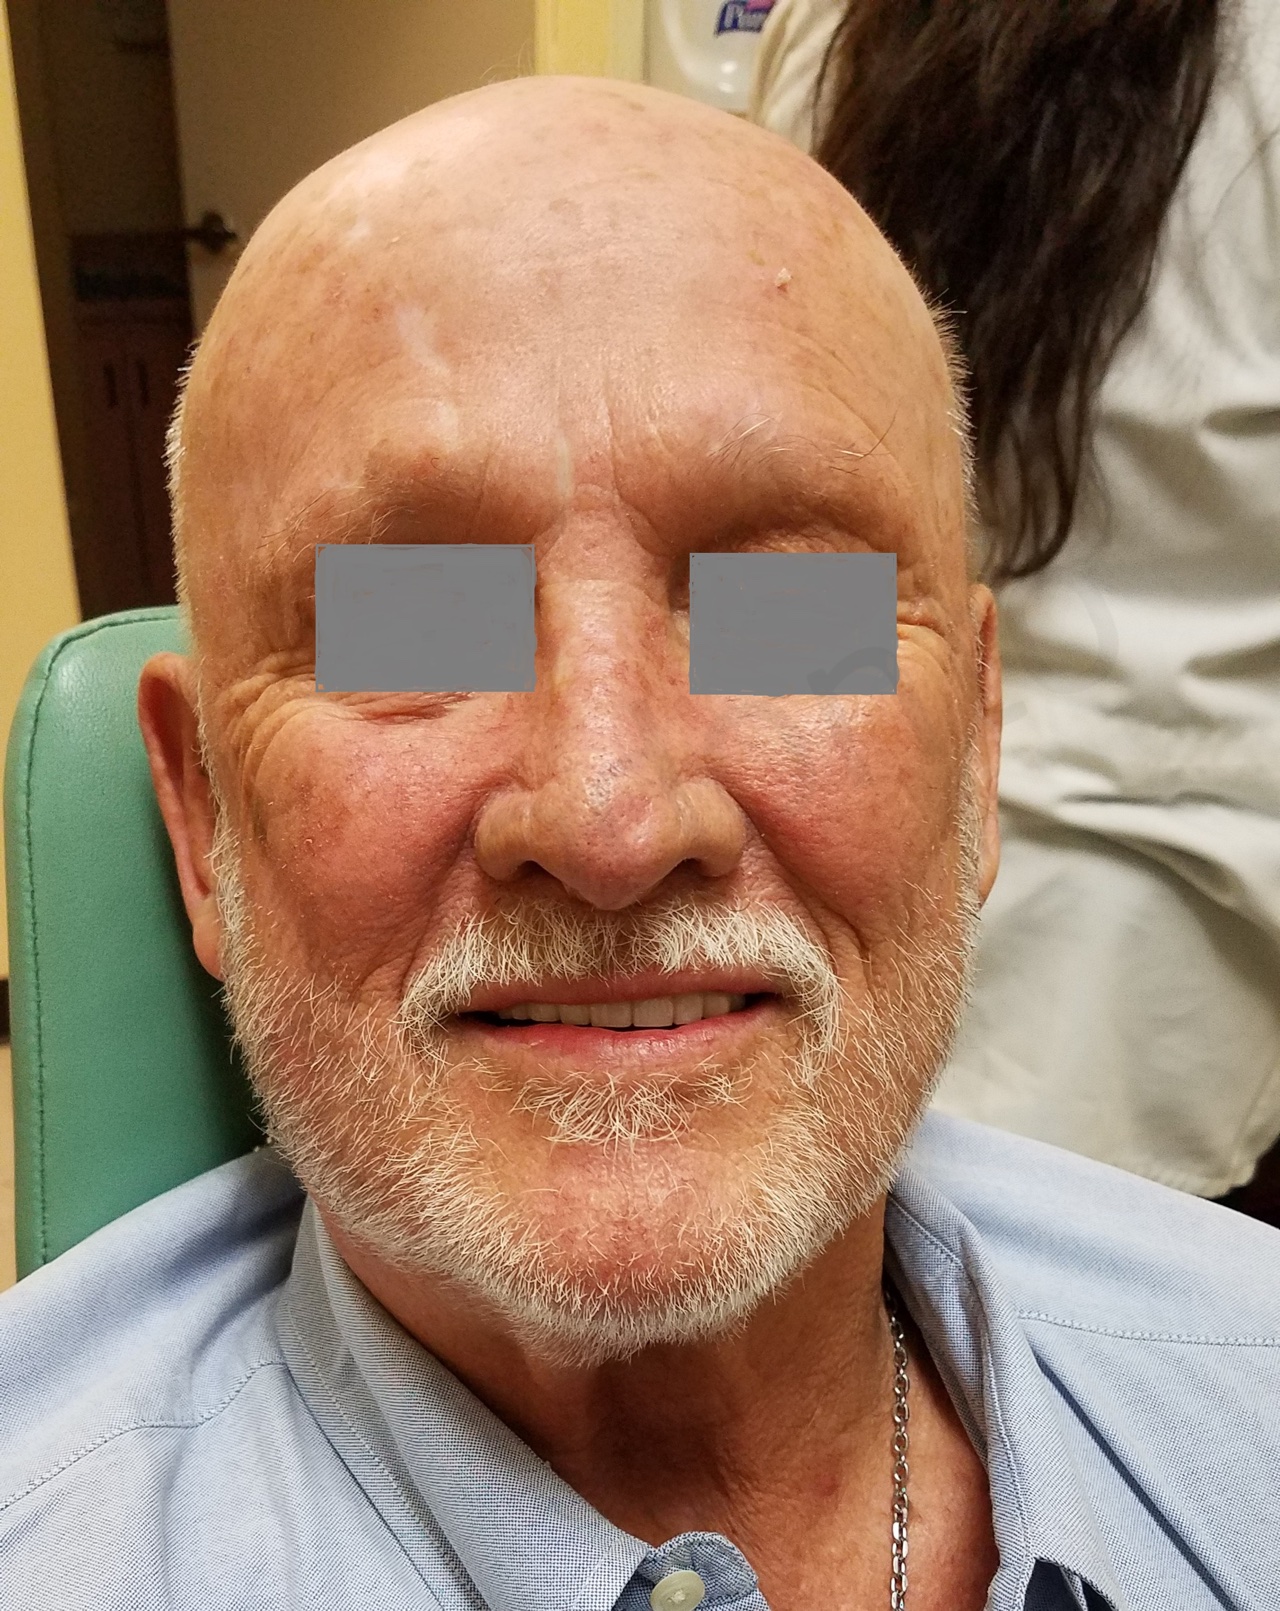 A 75-year-old male patient